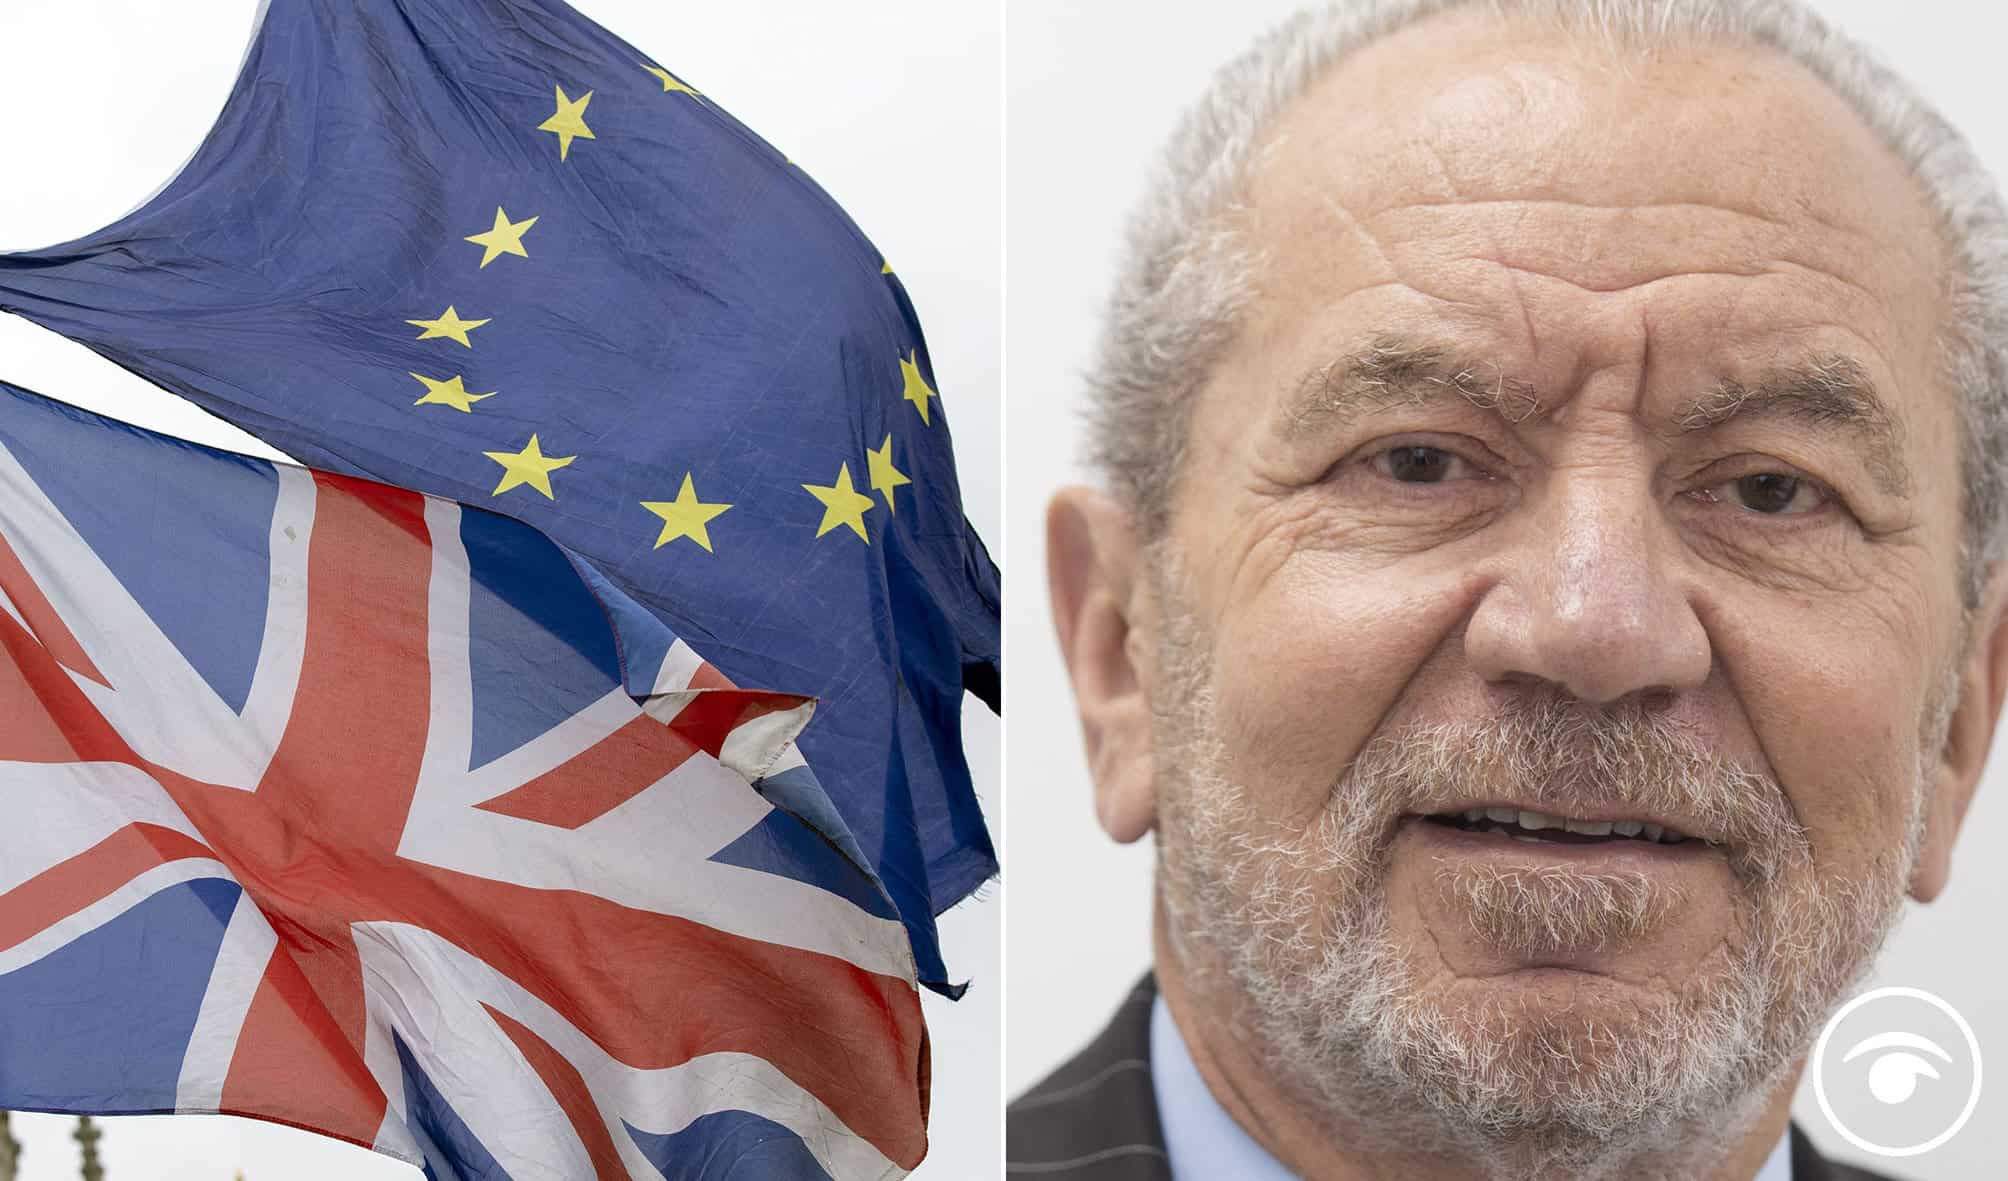 Lord Sugar asks how we could reverse Brexit and does this thread response nail it?